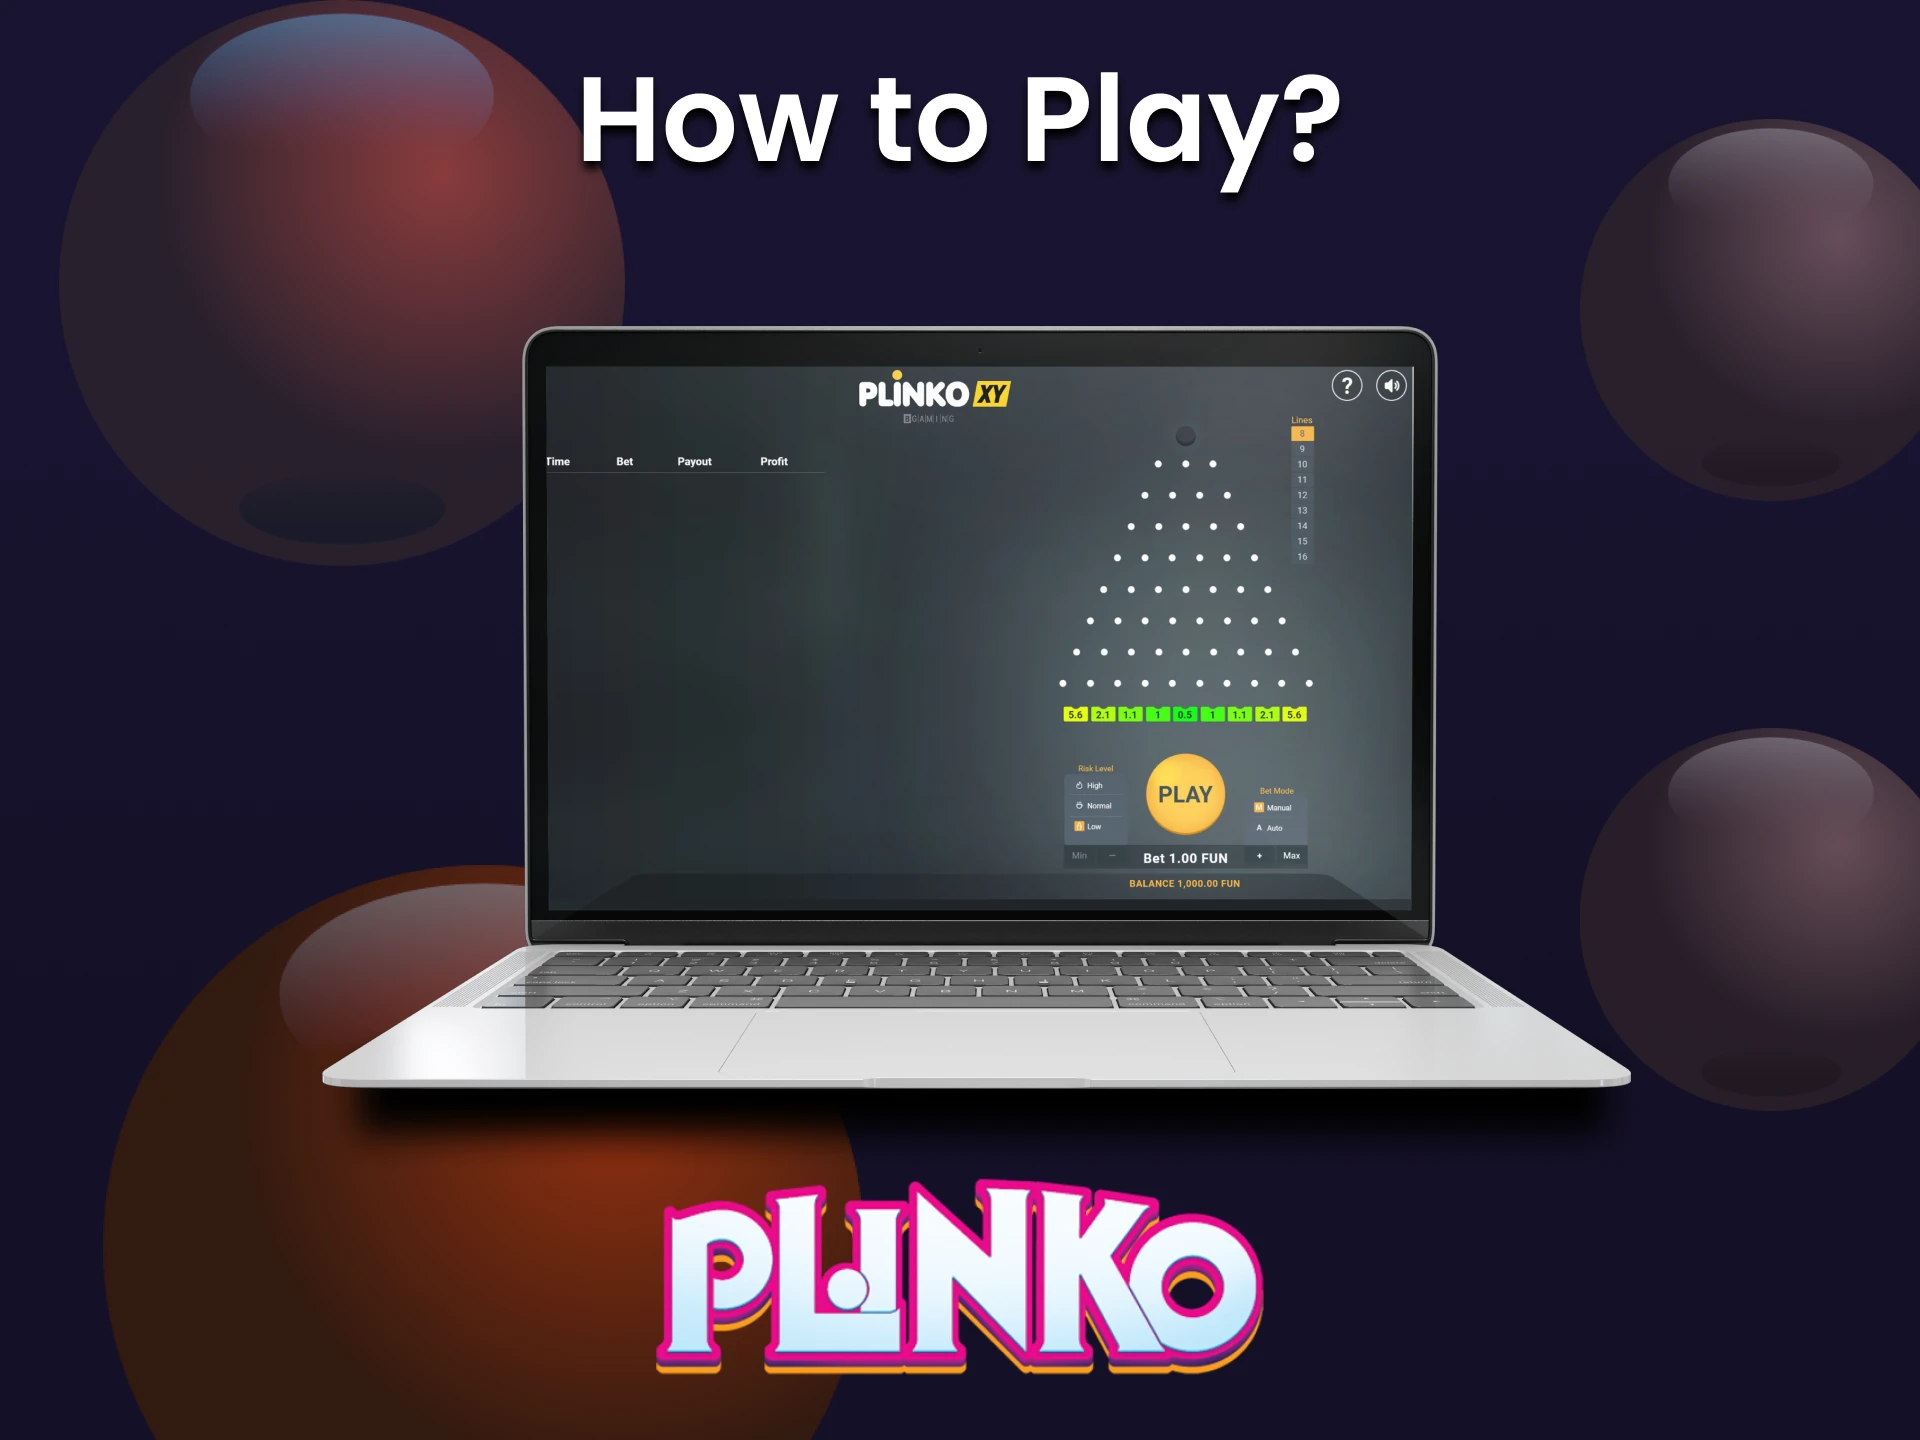 Find out how to start playing Plinko.